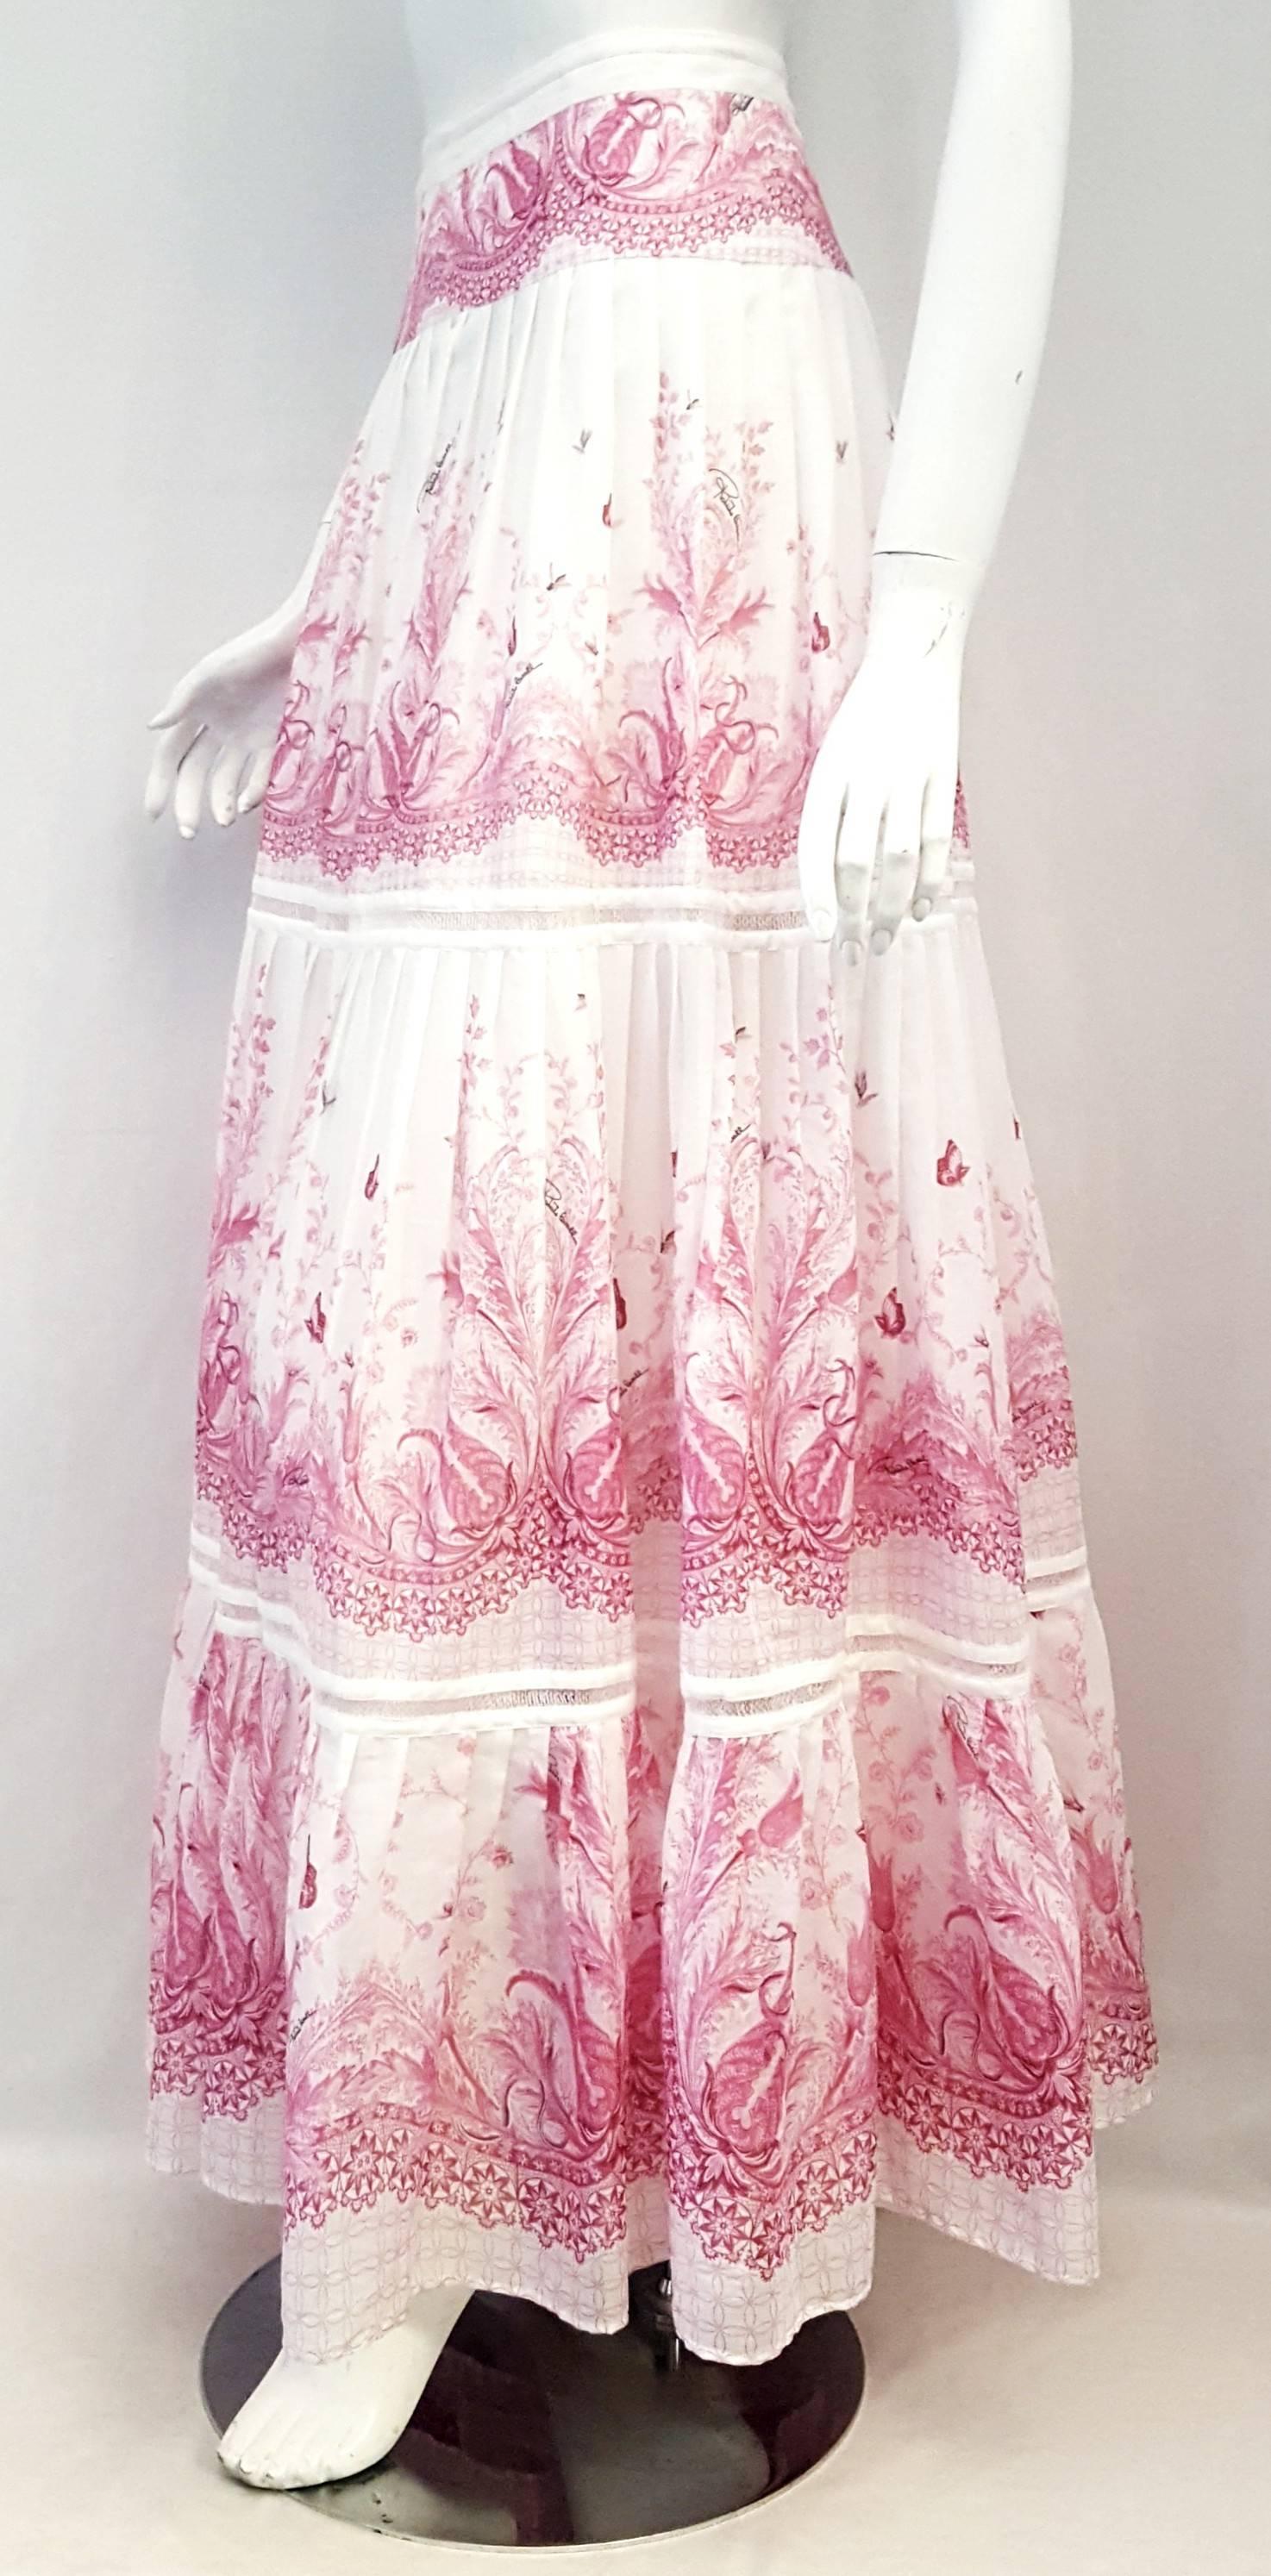 Roberto Cavalli pink and white cotton voile long casual pleated skirt from the waist with lace bands inserted in between the cotton floral print panels features fluttering butterflies.  This romantic Italian countryside peasant print is excellent